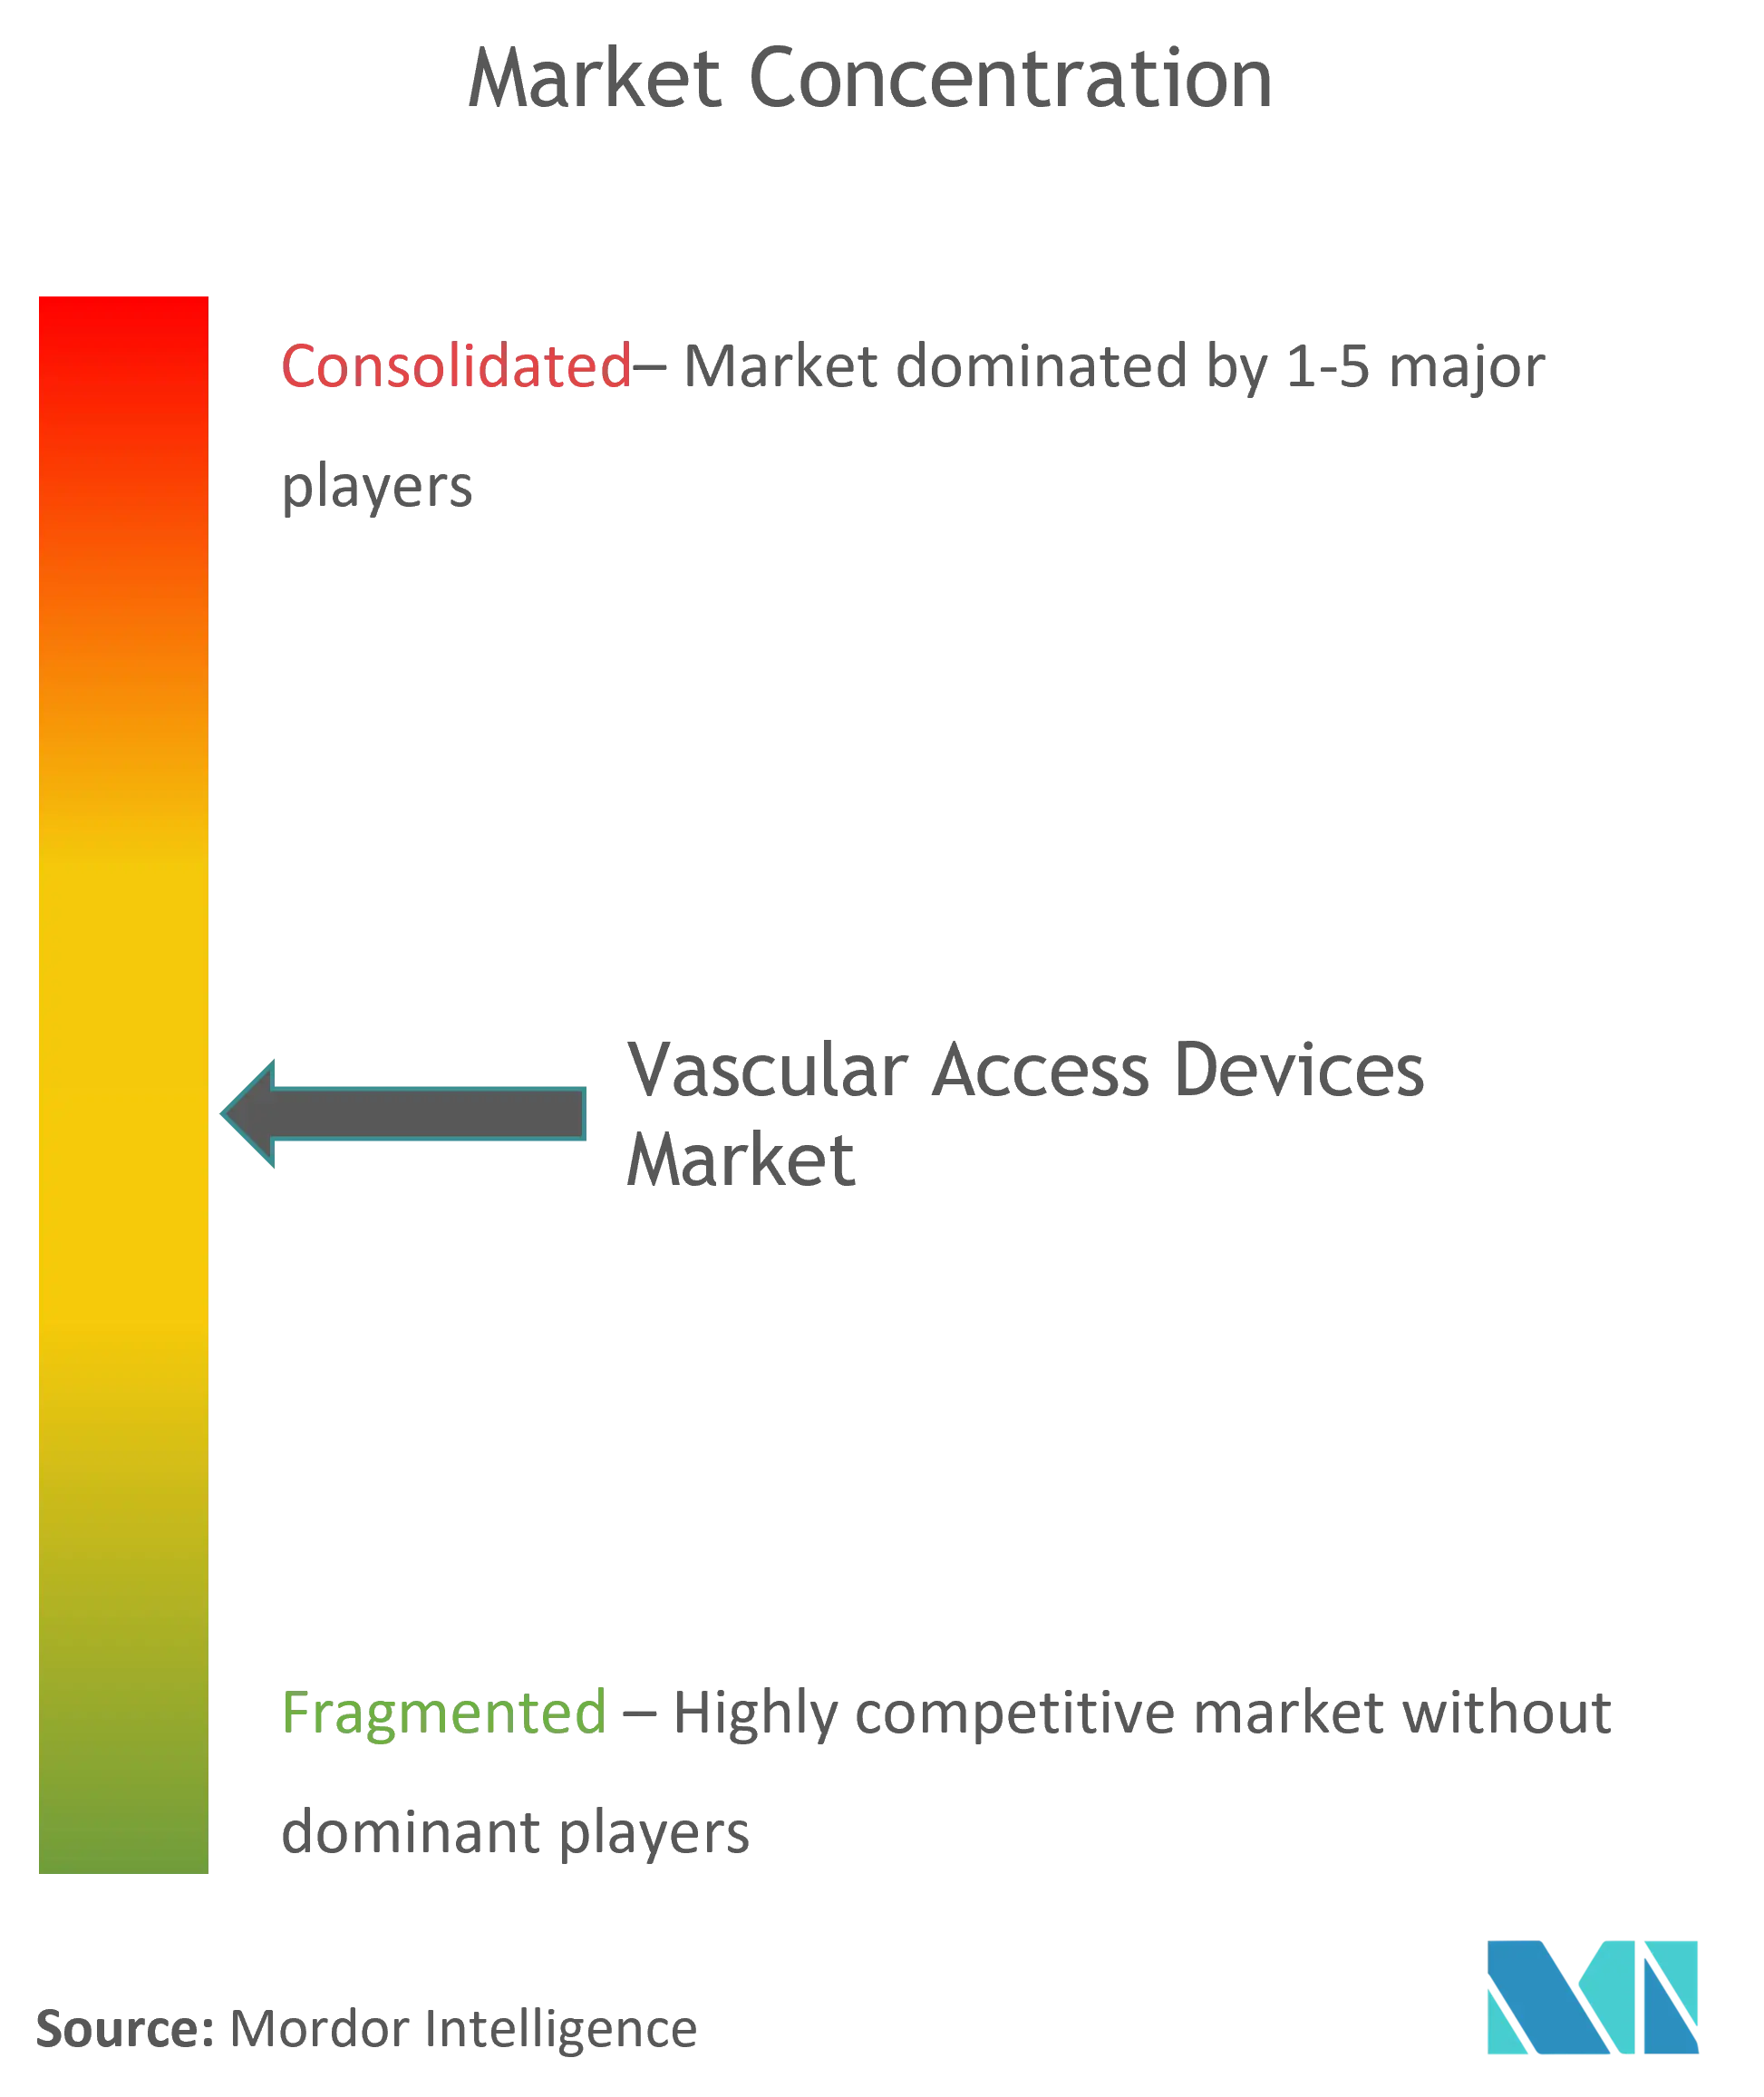 Global Vascular Access Devices Market Concentration